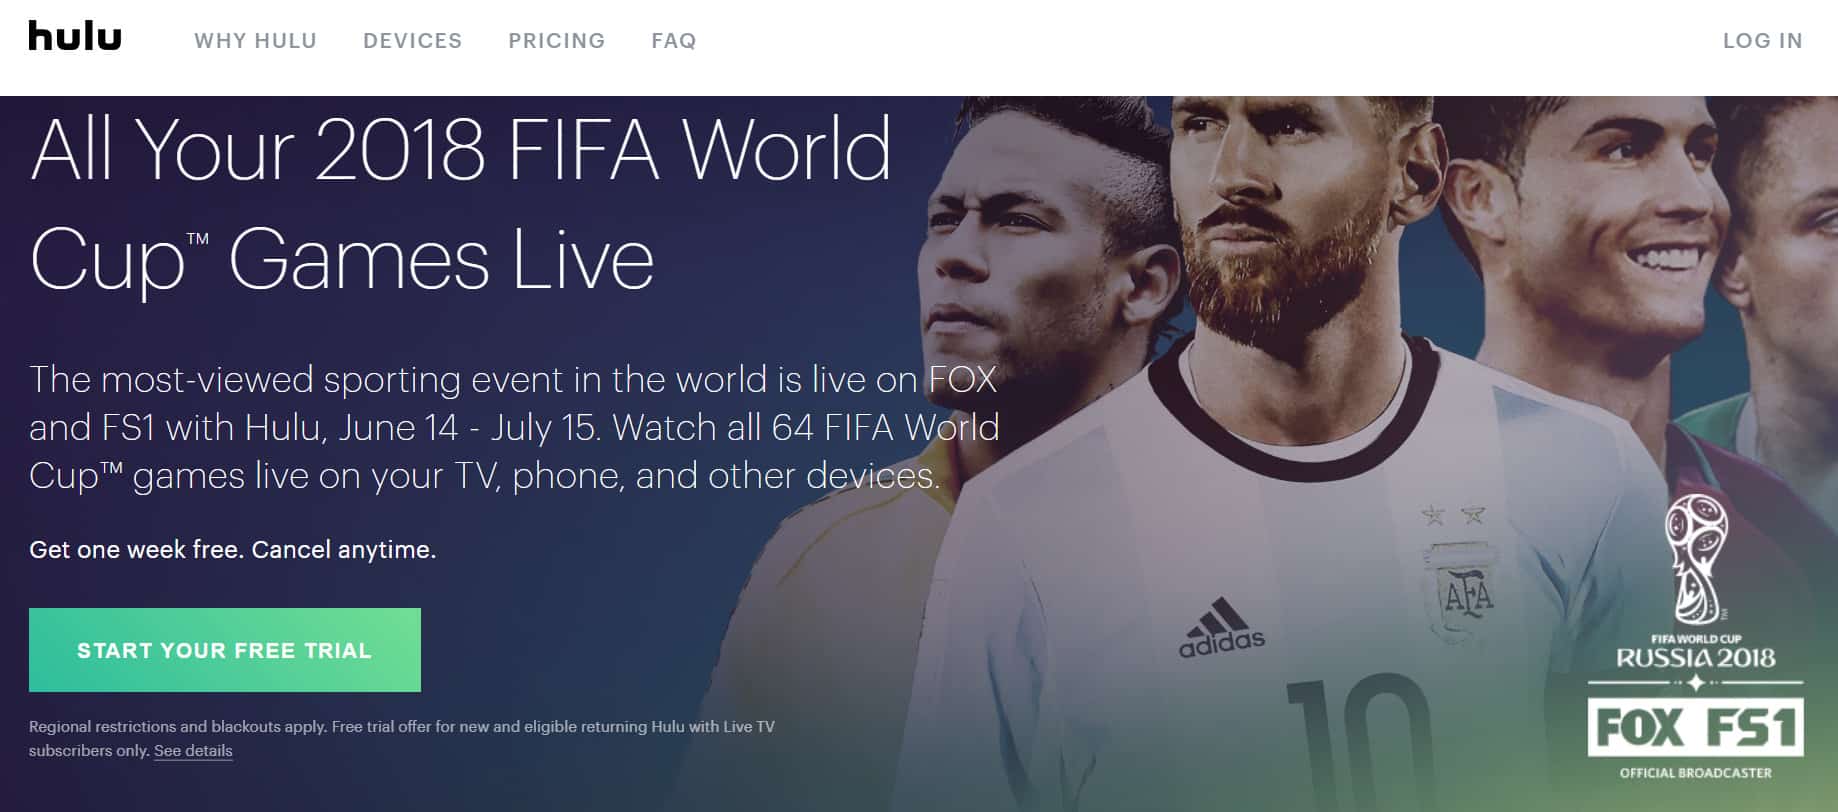 How to watch 2018 FIFA World Cup matches on FOX Sports abroad